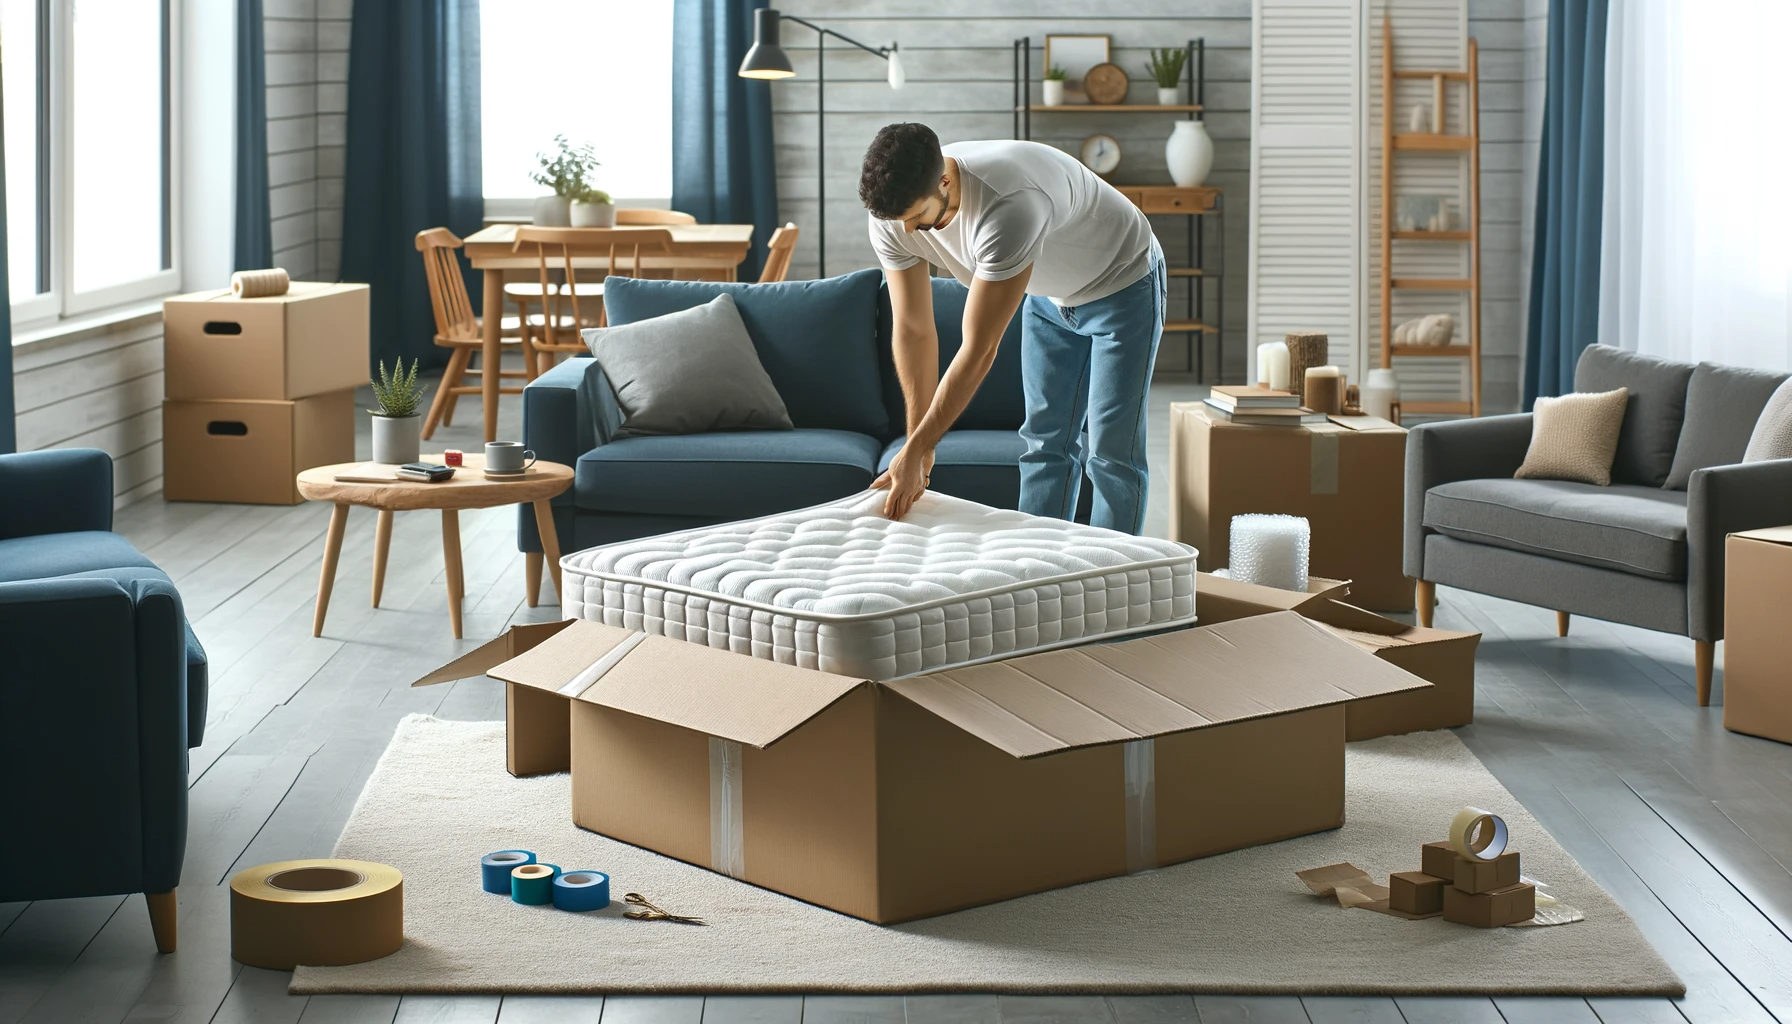 How to put a mattress in a Box